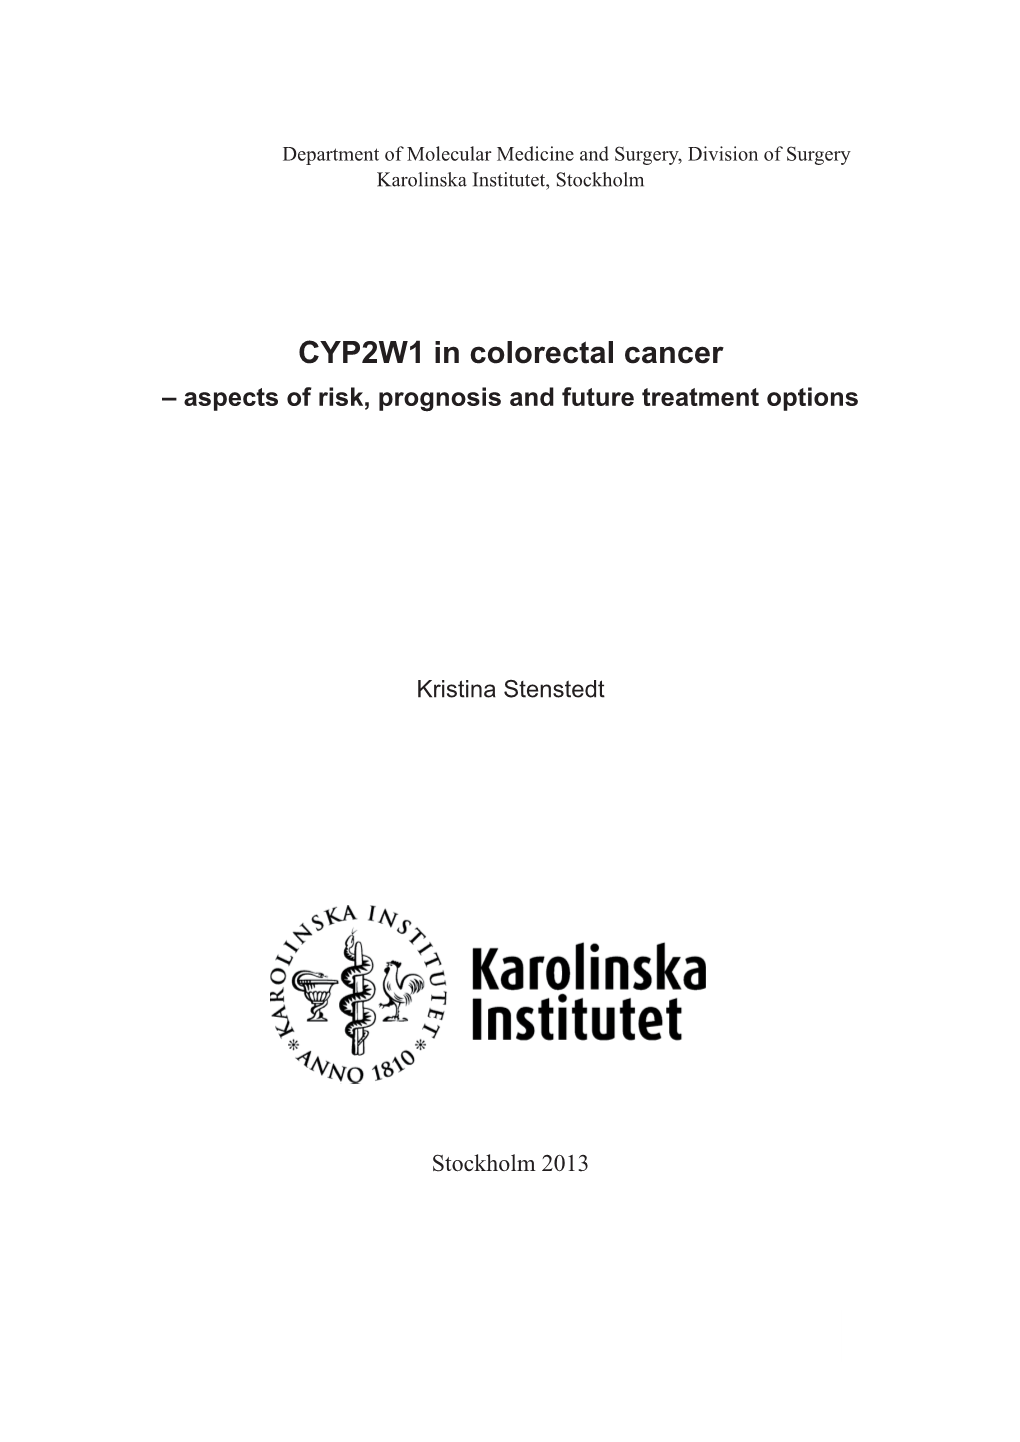 CYP2W1 in Colorectal Cancer – Aspects of Risk, Prognosis and Future Treatment Options